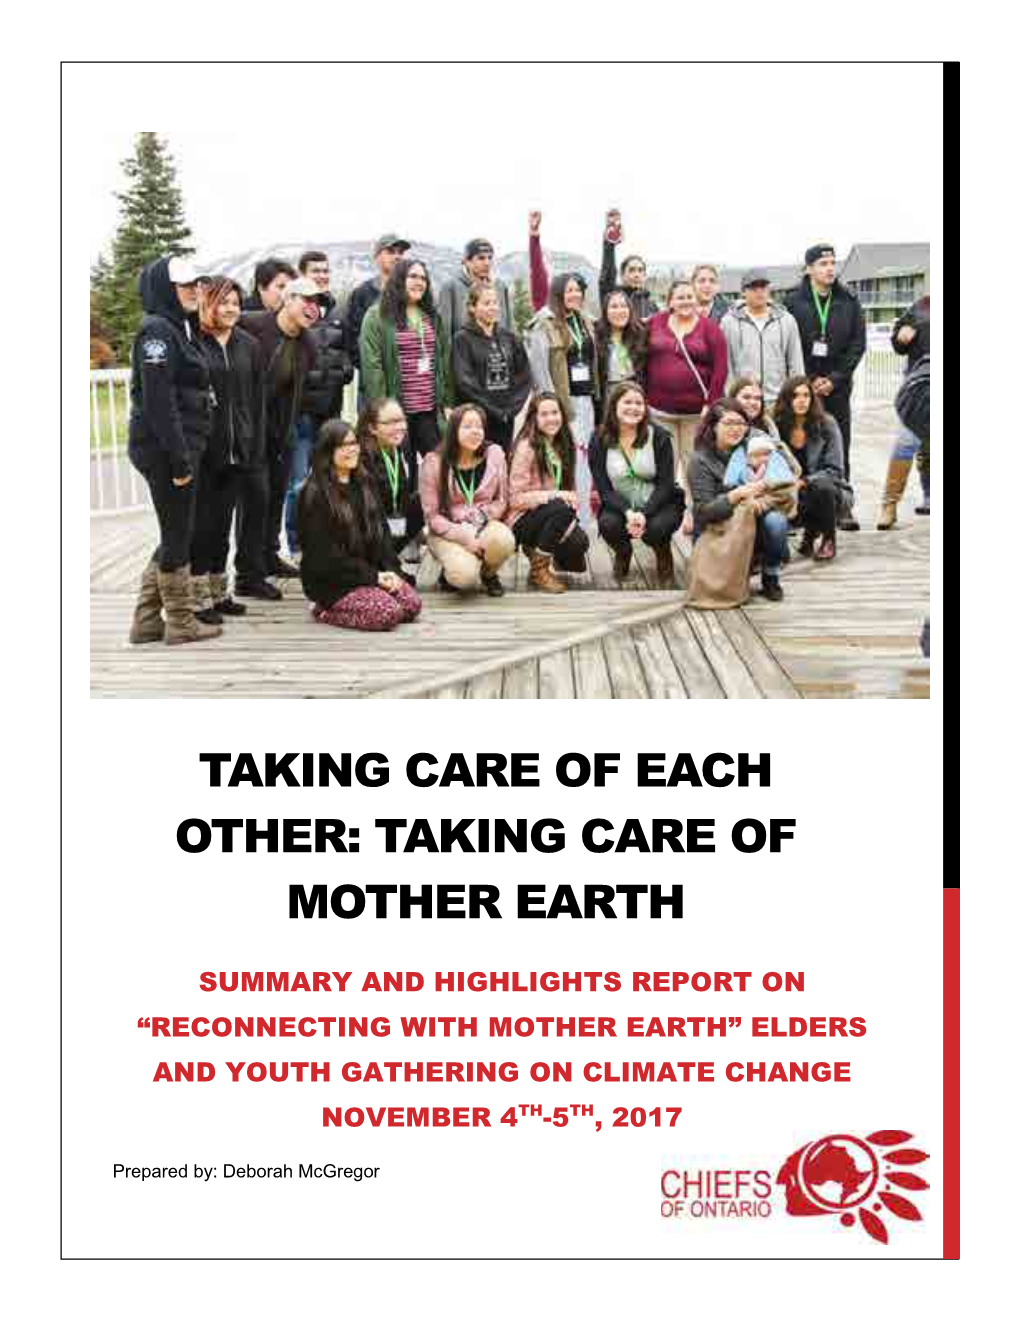 “Reconnecting with Mother Earth” Elders and Youth Gathering on Climate Change November 4Th-5Th, 2017